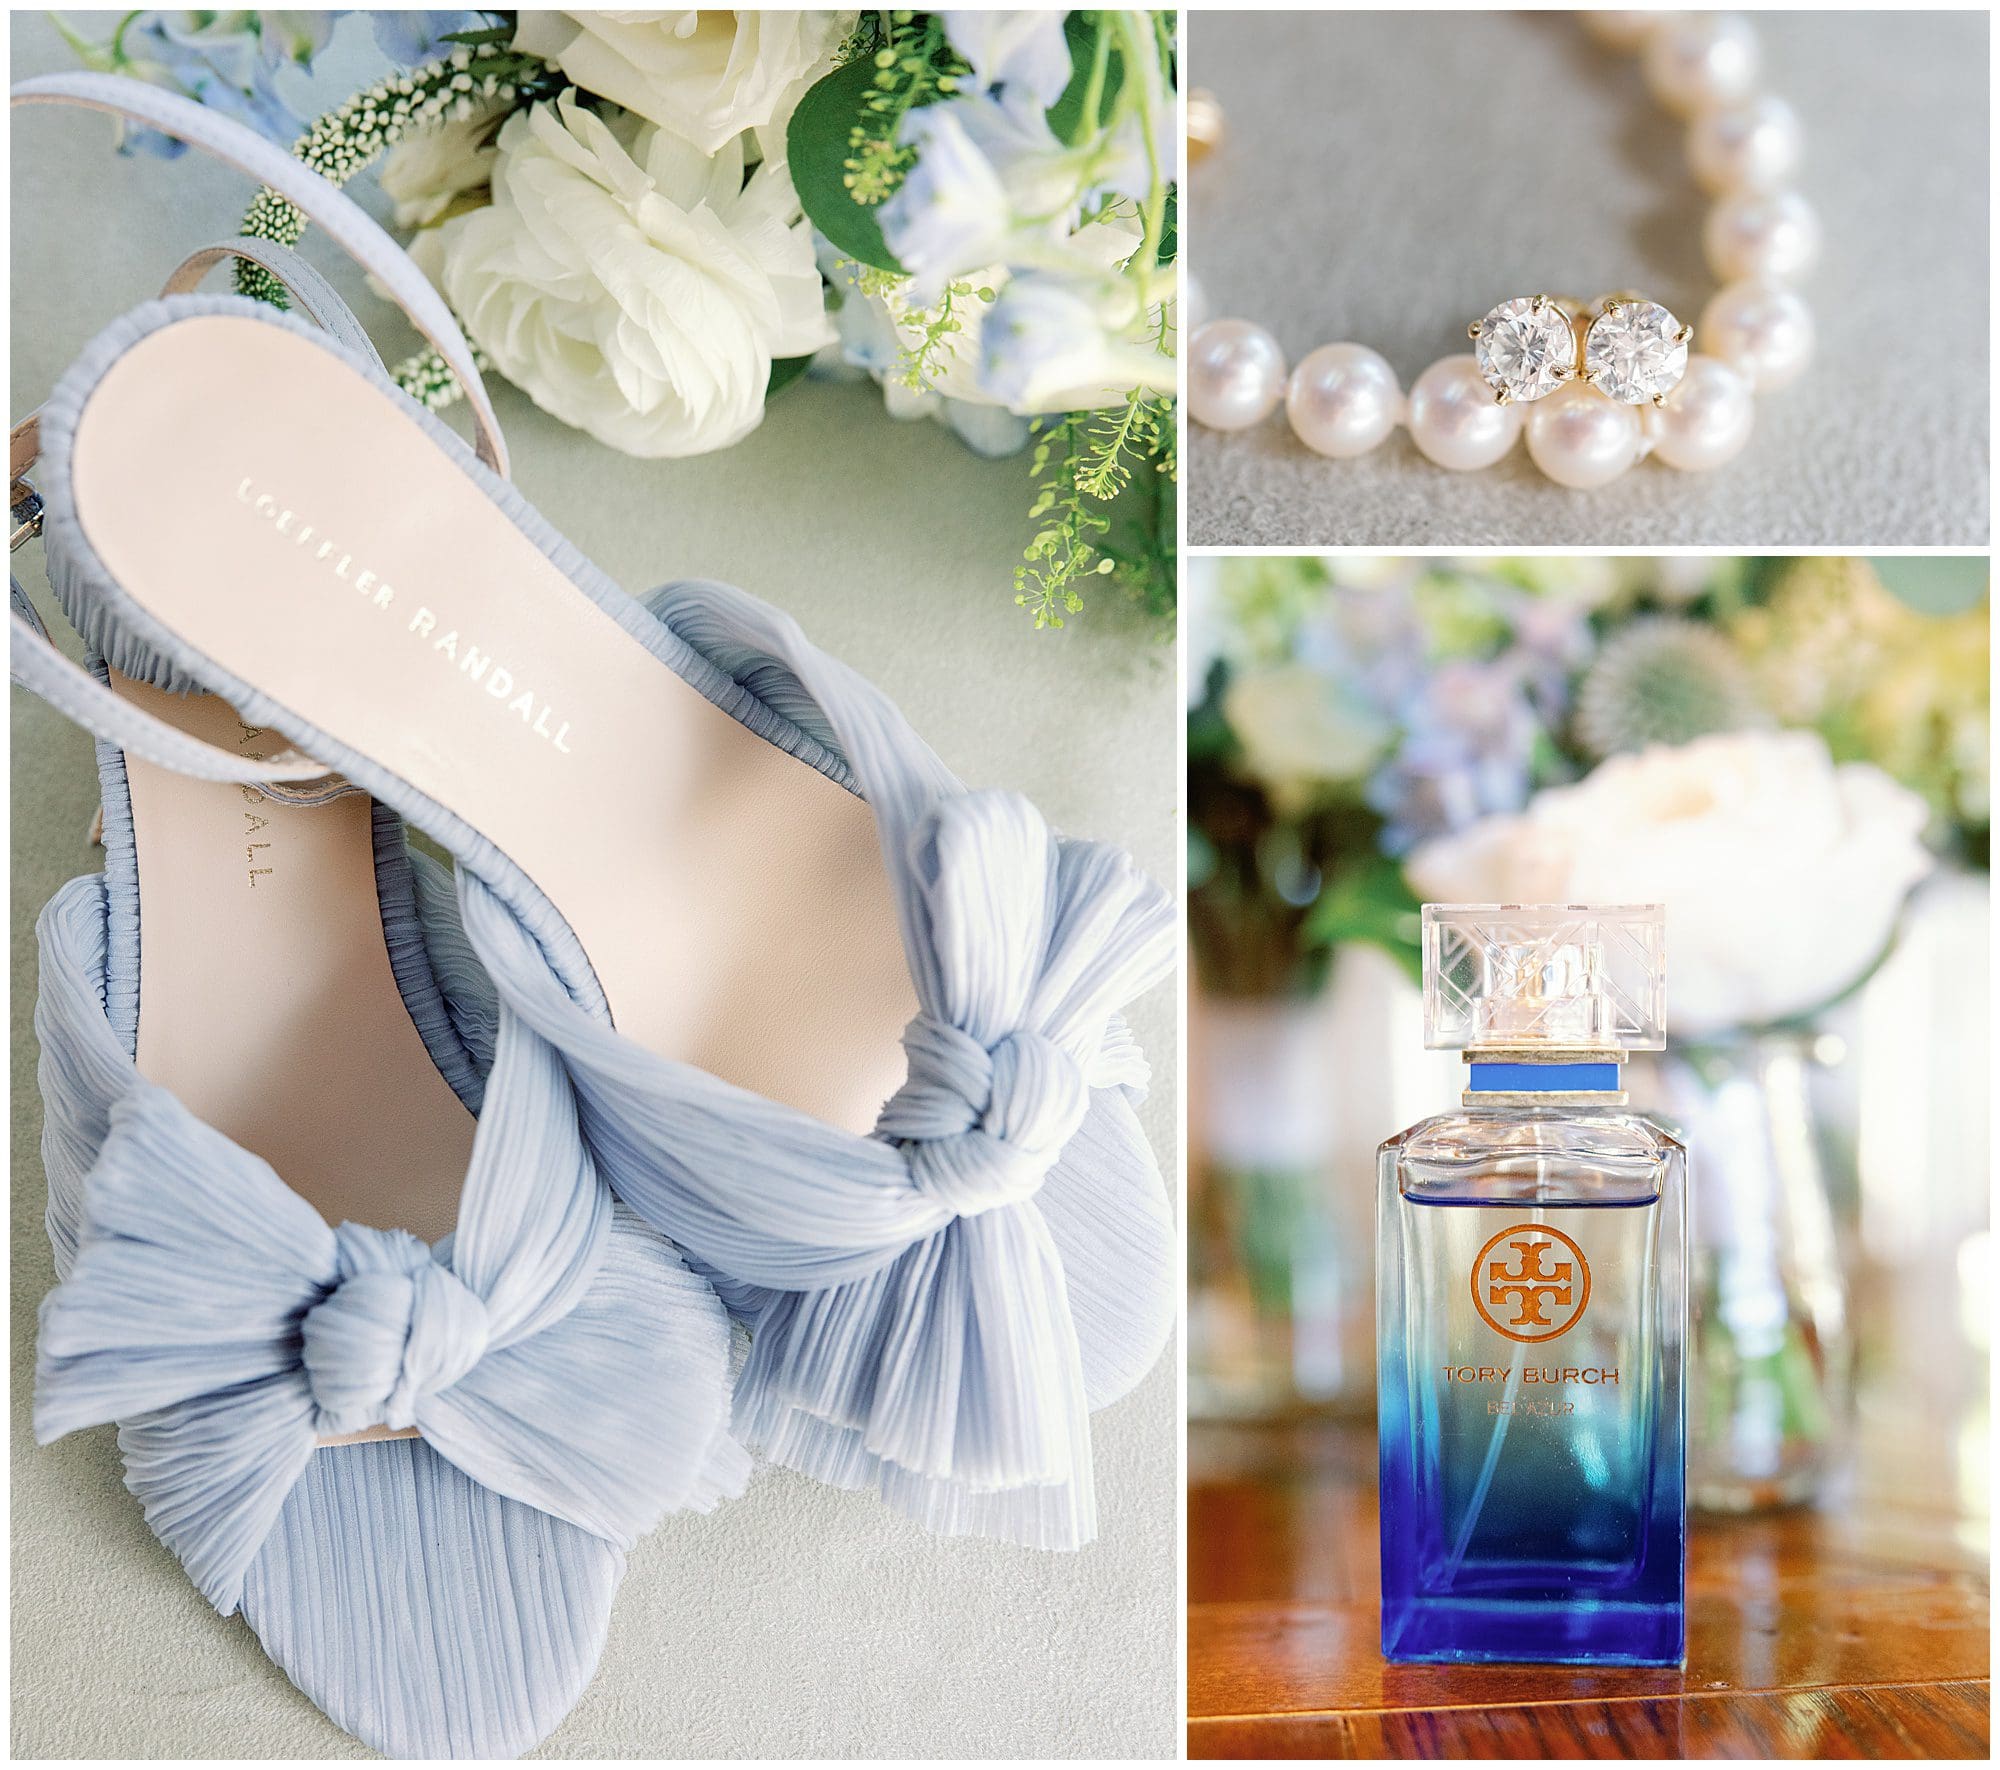 A blue and white wedding with pearls and shoes.